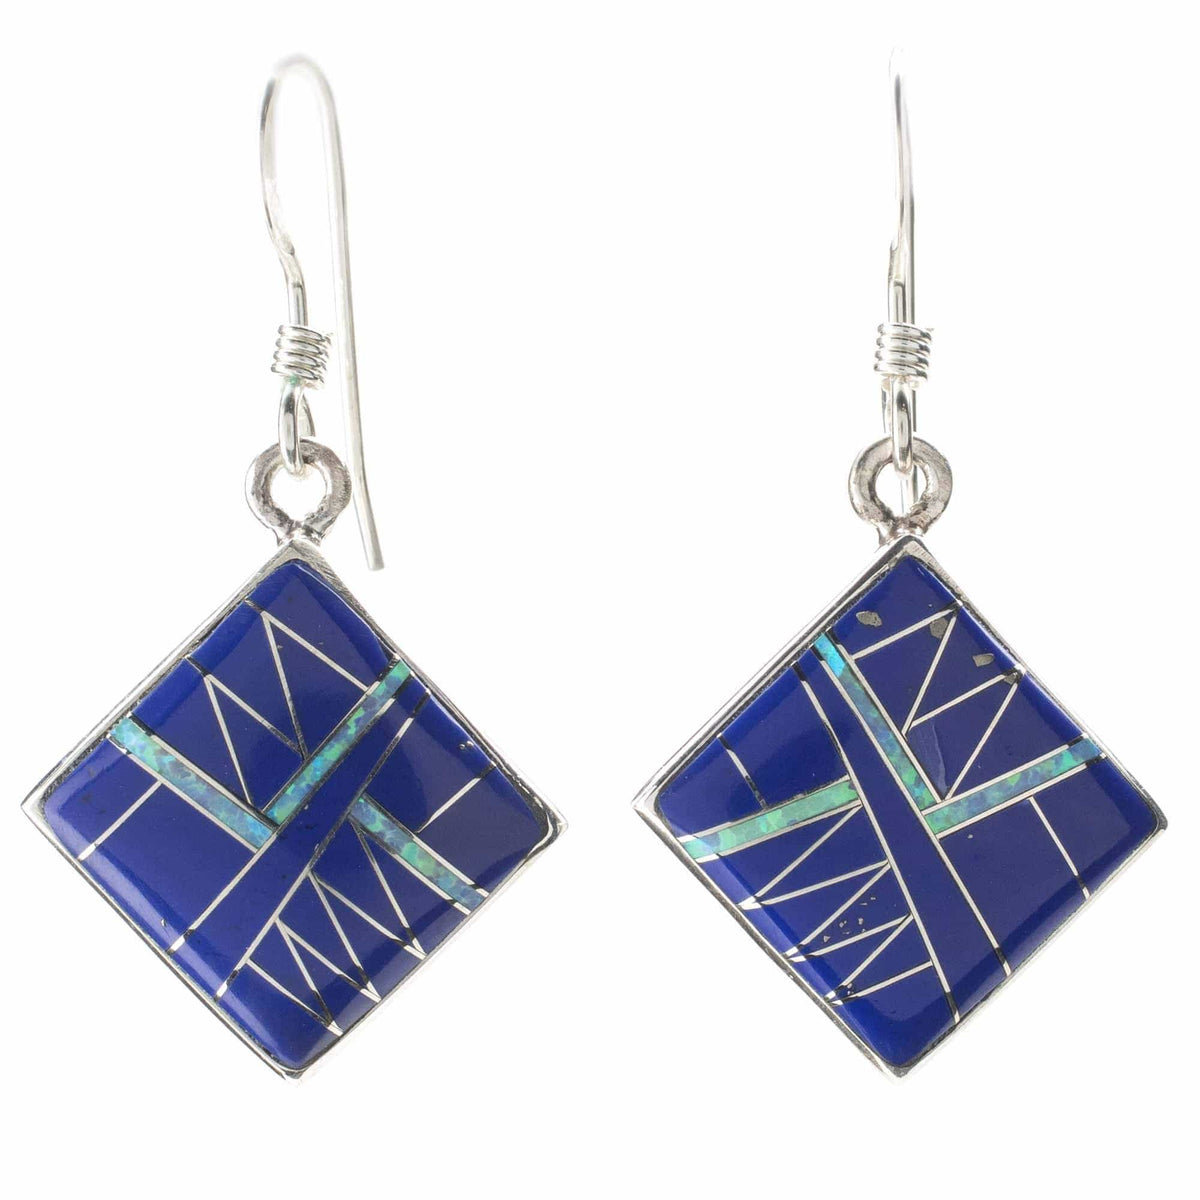 Lapis Square 925 Sterling Silver Earring with French Hook USA Handmade with Aqua Opal Accent